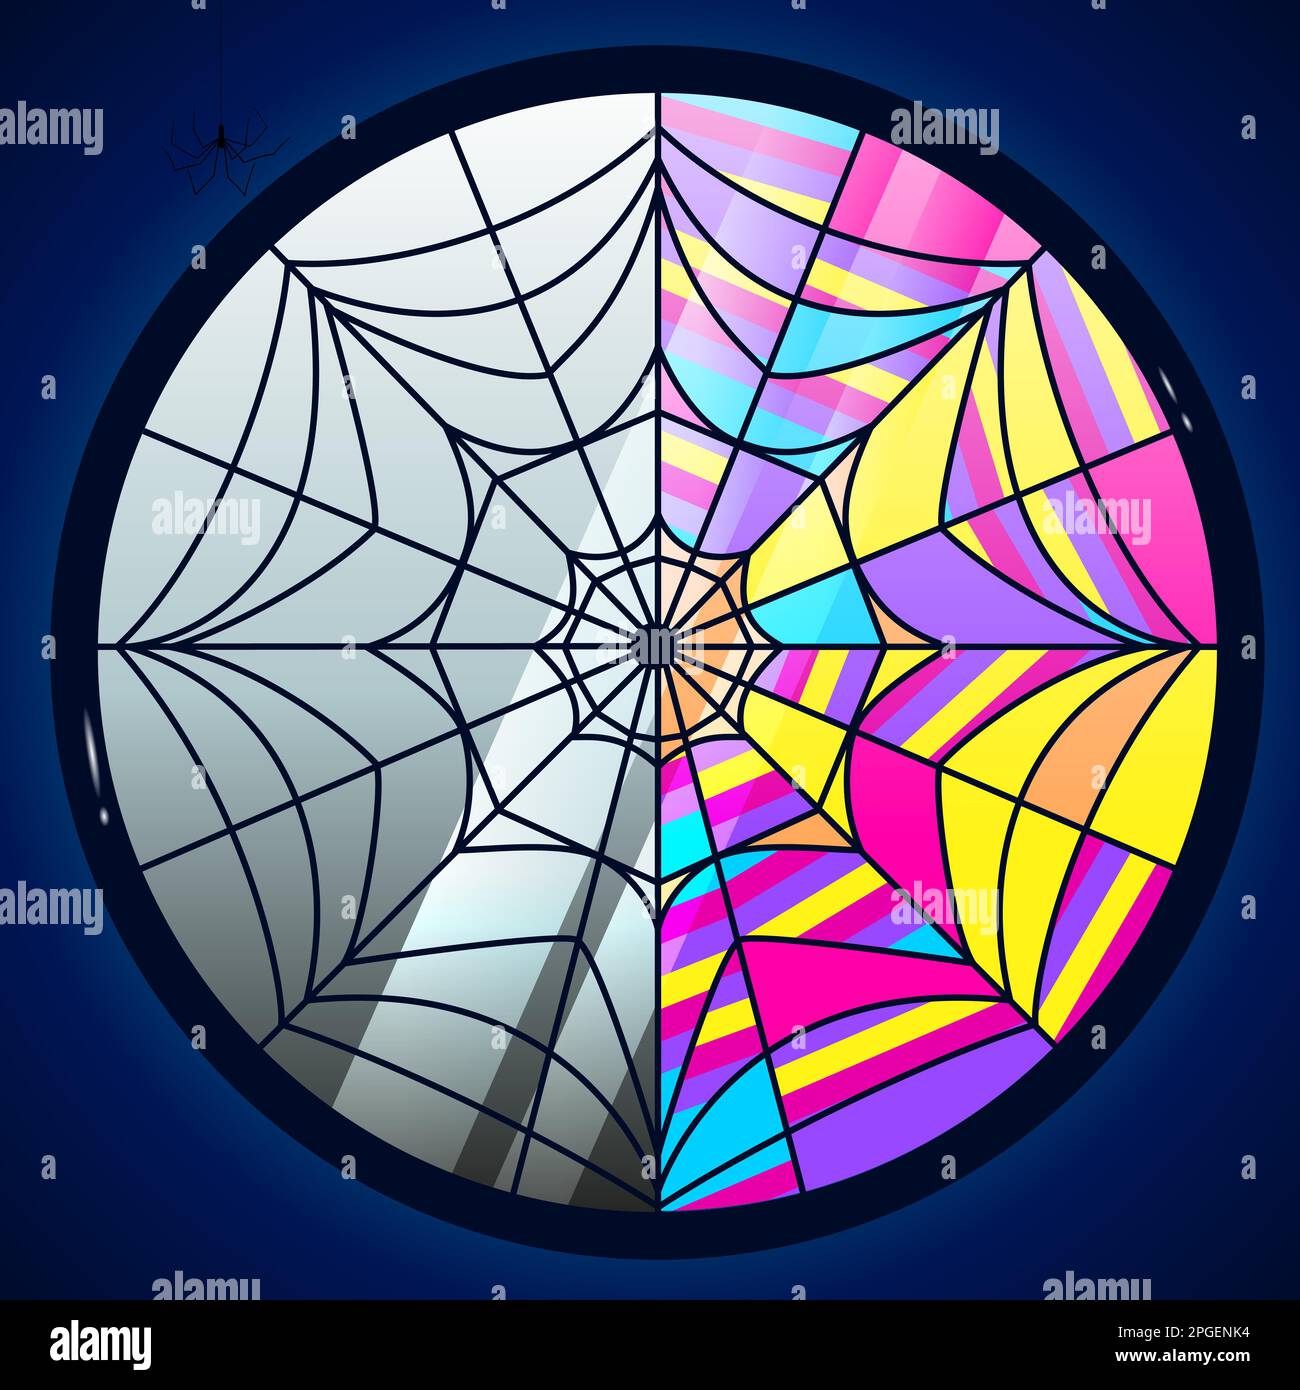 Stained glass window in the form of a web with divided halves. Stock Vector